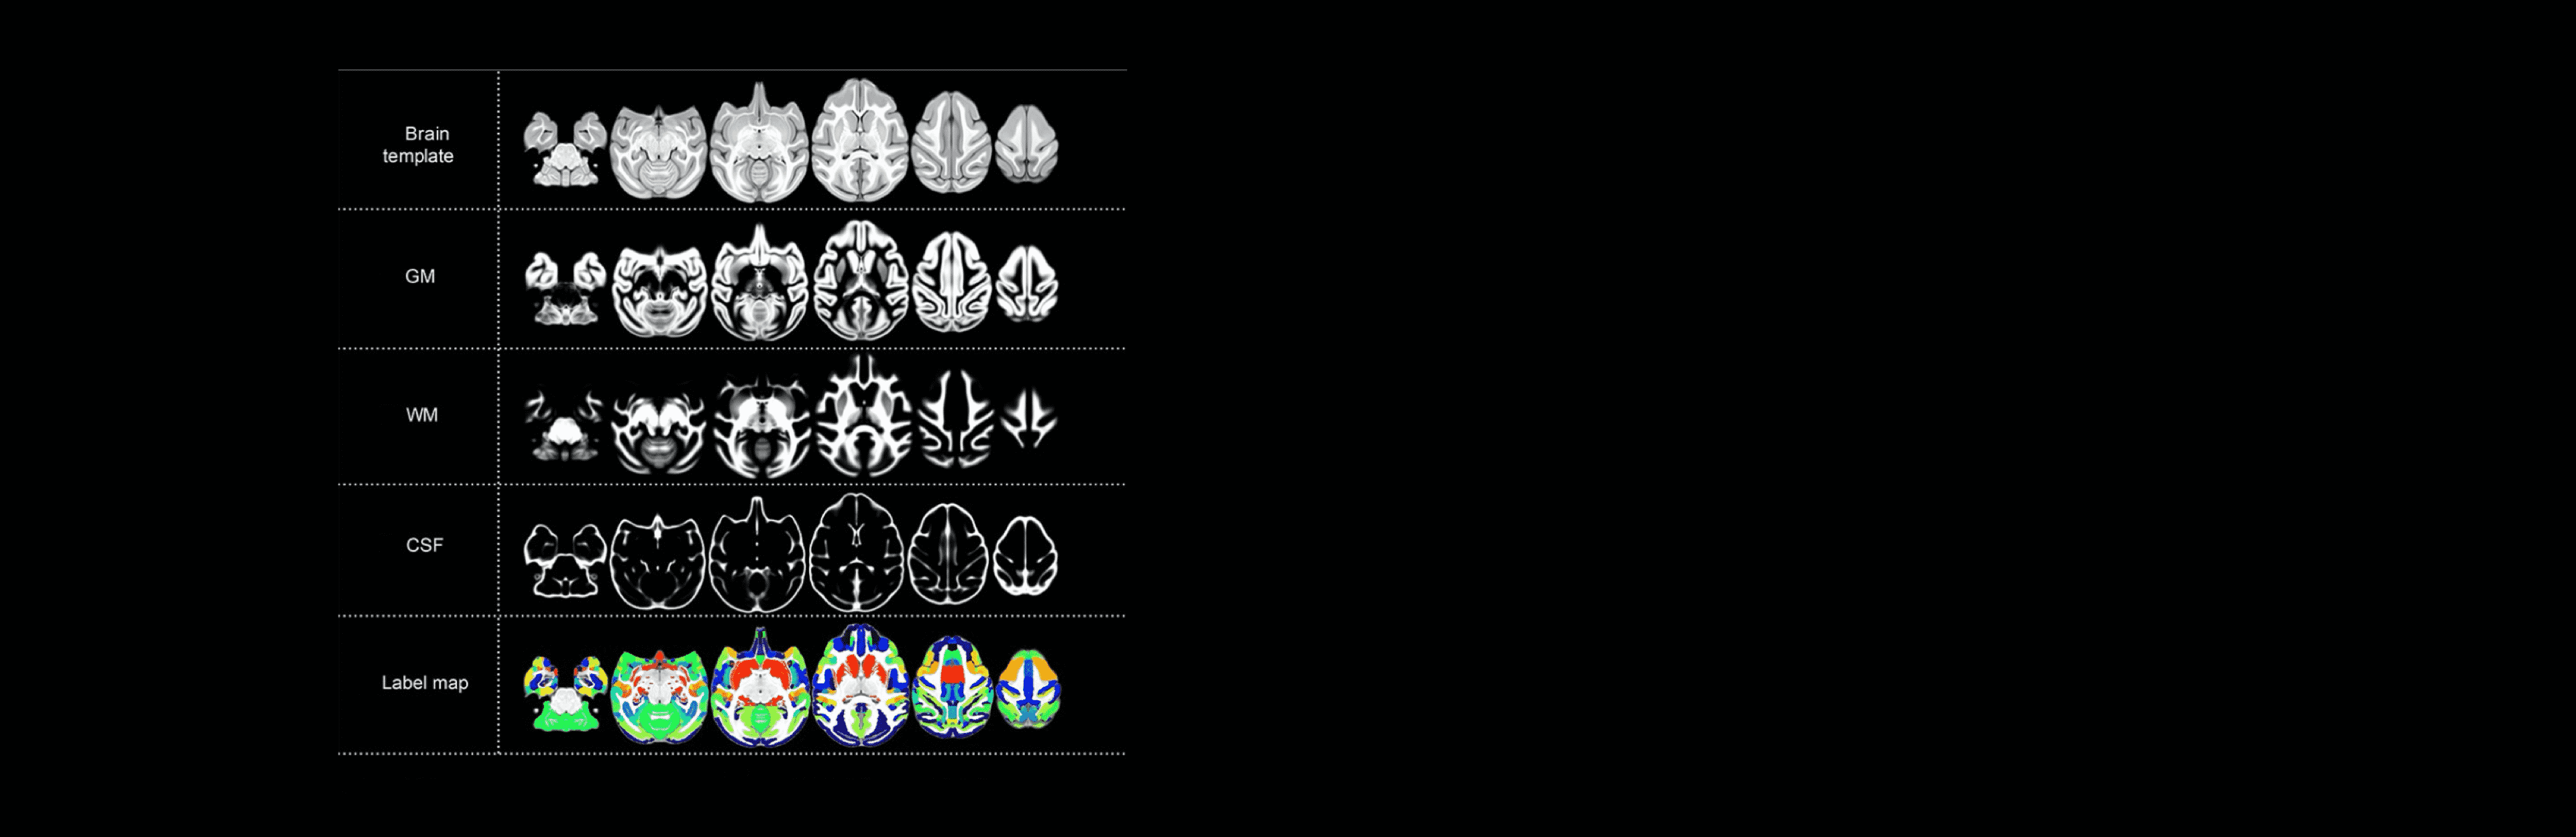 Individual Brain Differences Based on a Population MRI-Based Atlas